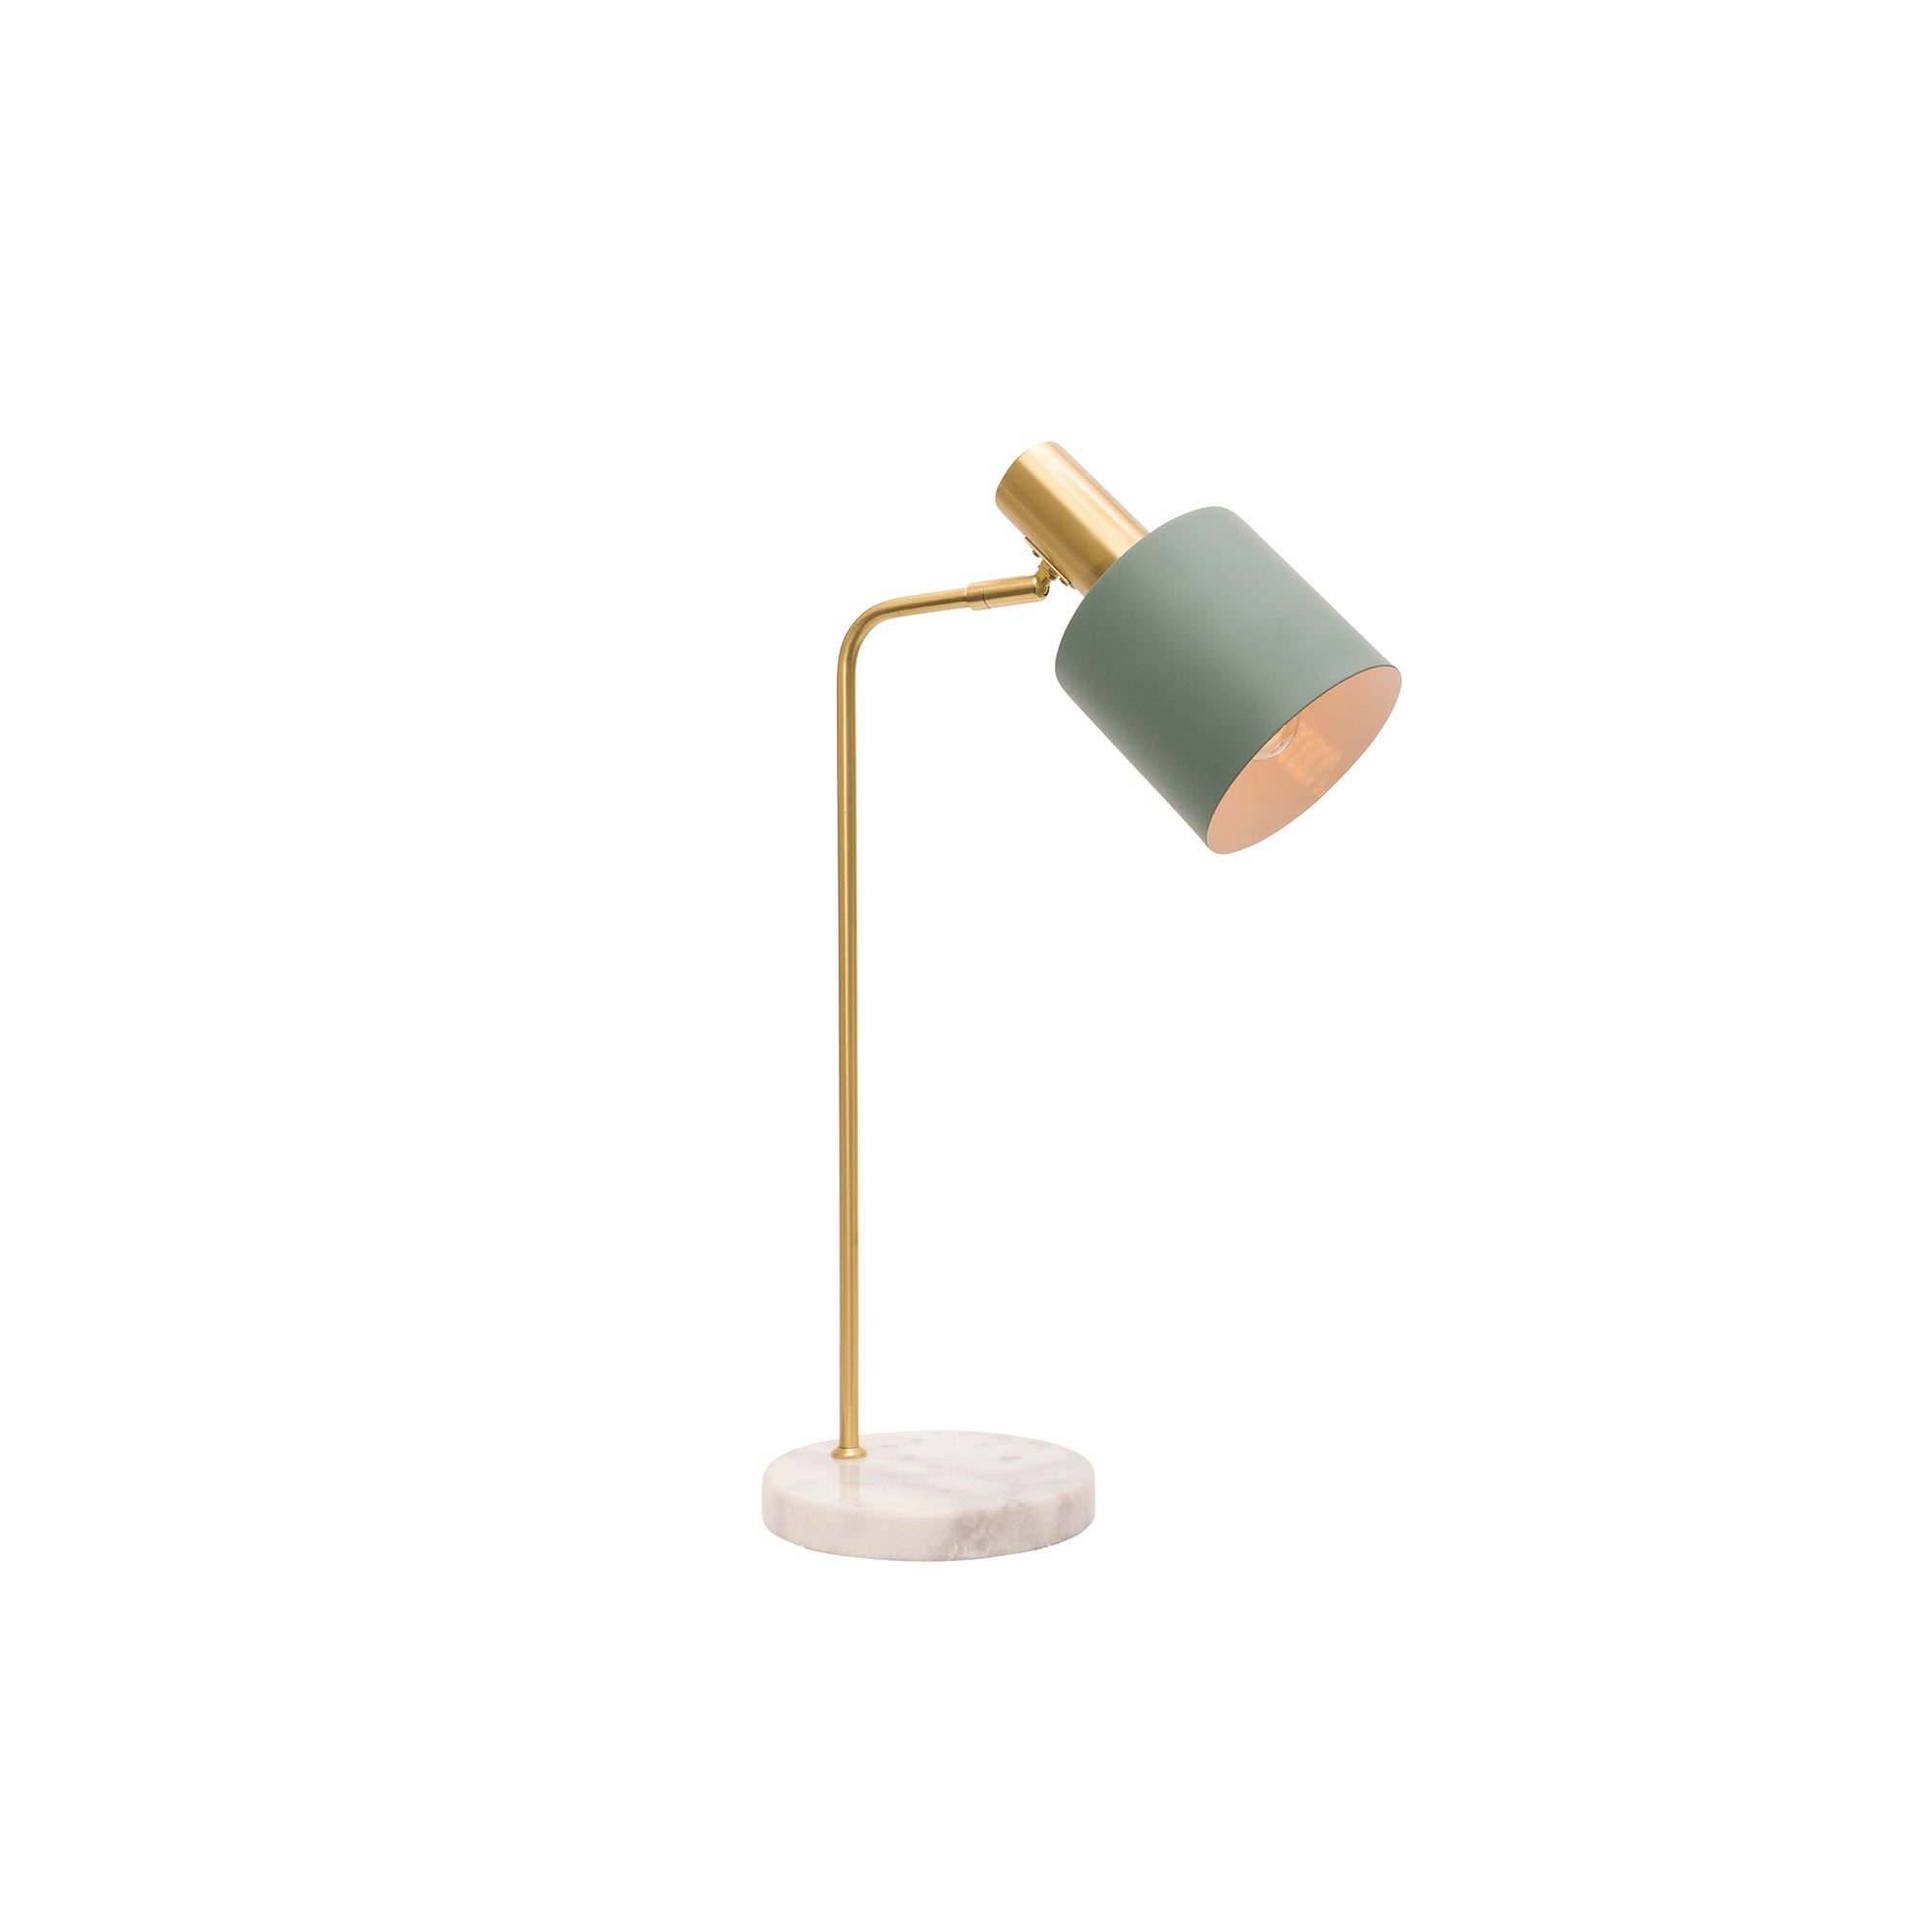 Addison Jade and Brushed Brass Modern Industrial Table Lamp